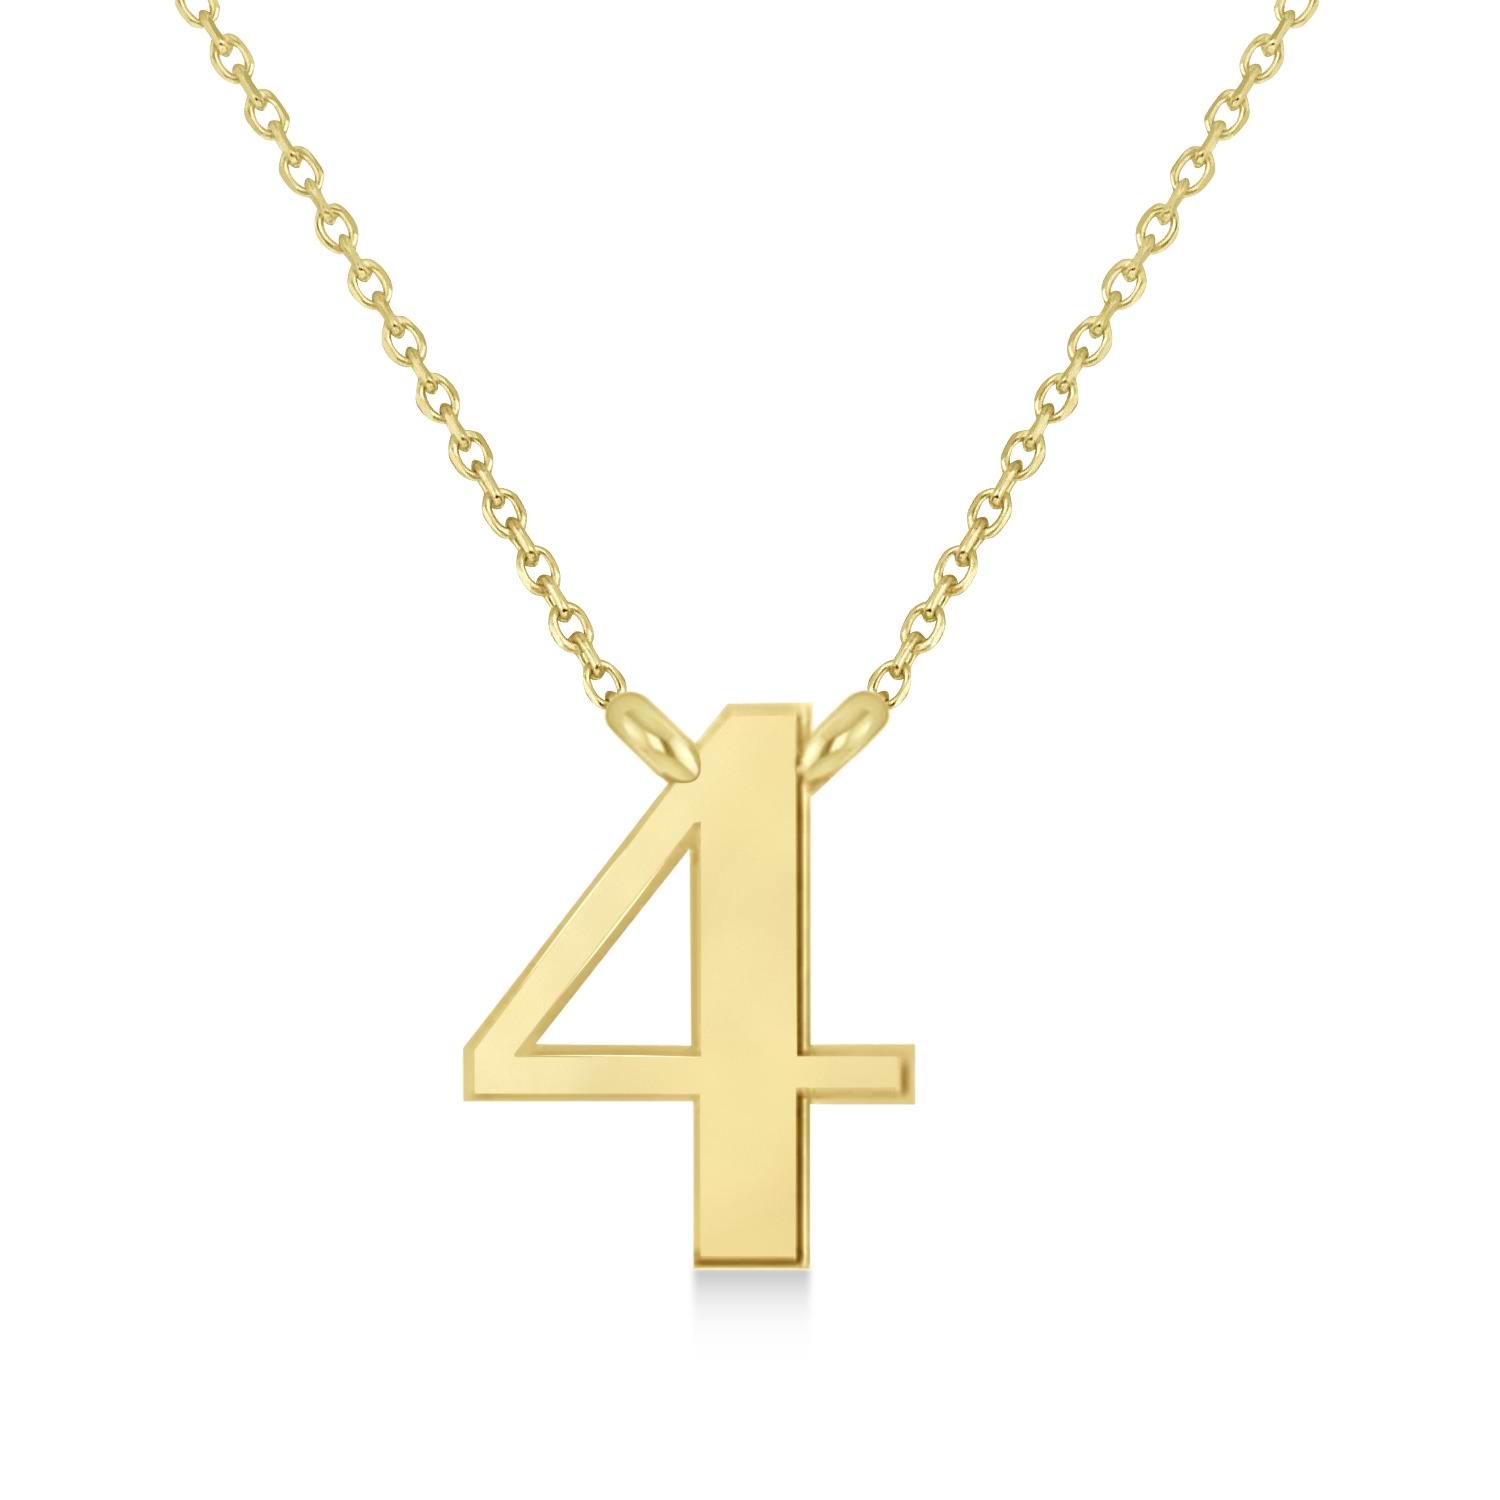 Personalized Plain Text Number Pendant Necklace 14k Yellow Gold